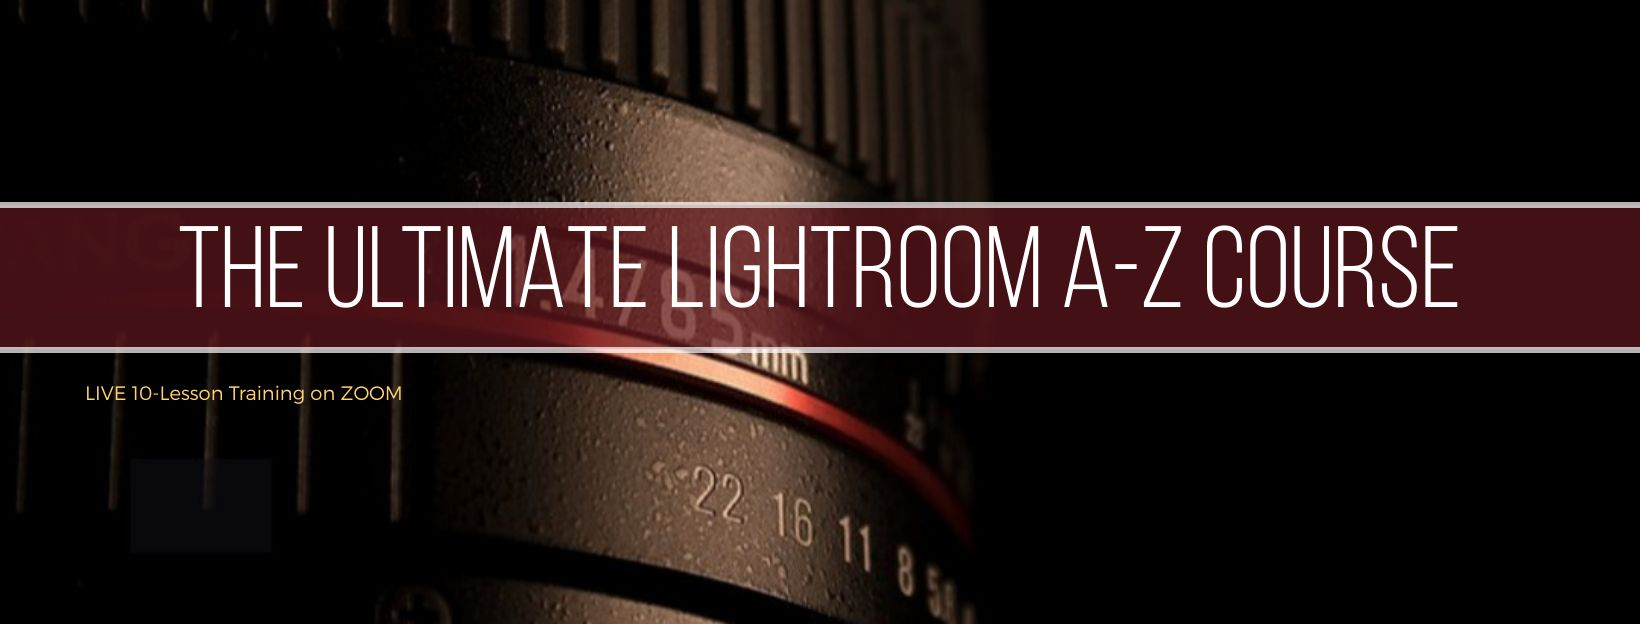 Online Lightroom Courses - a complete guide for photographers